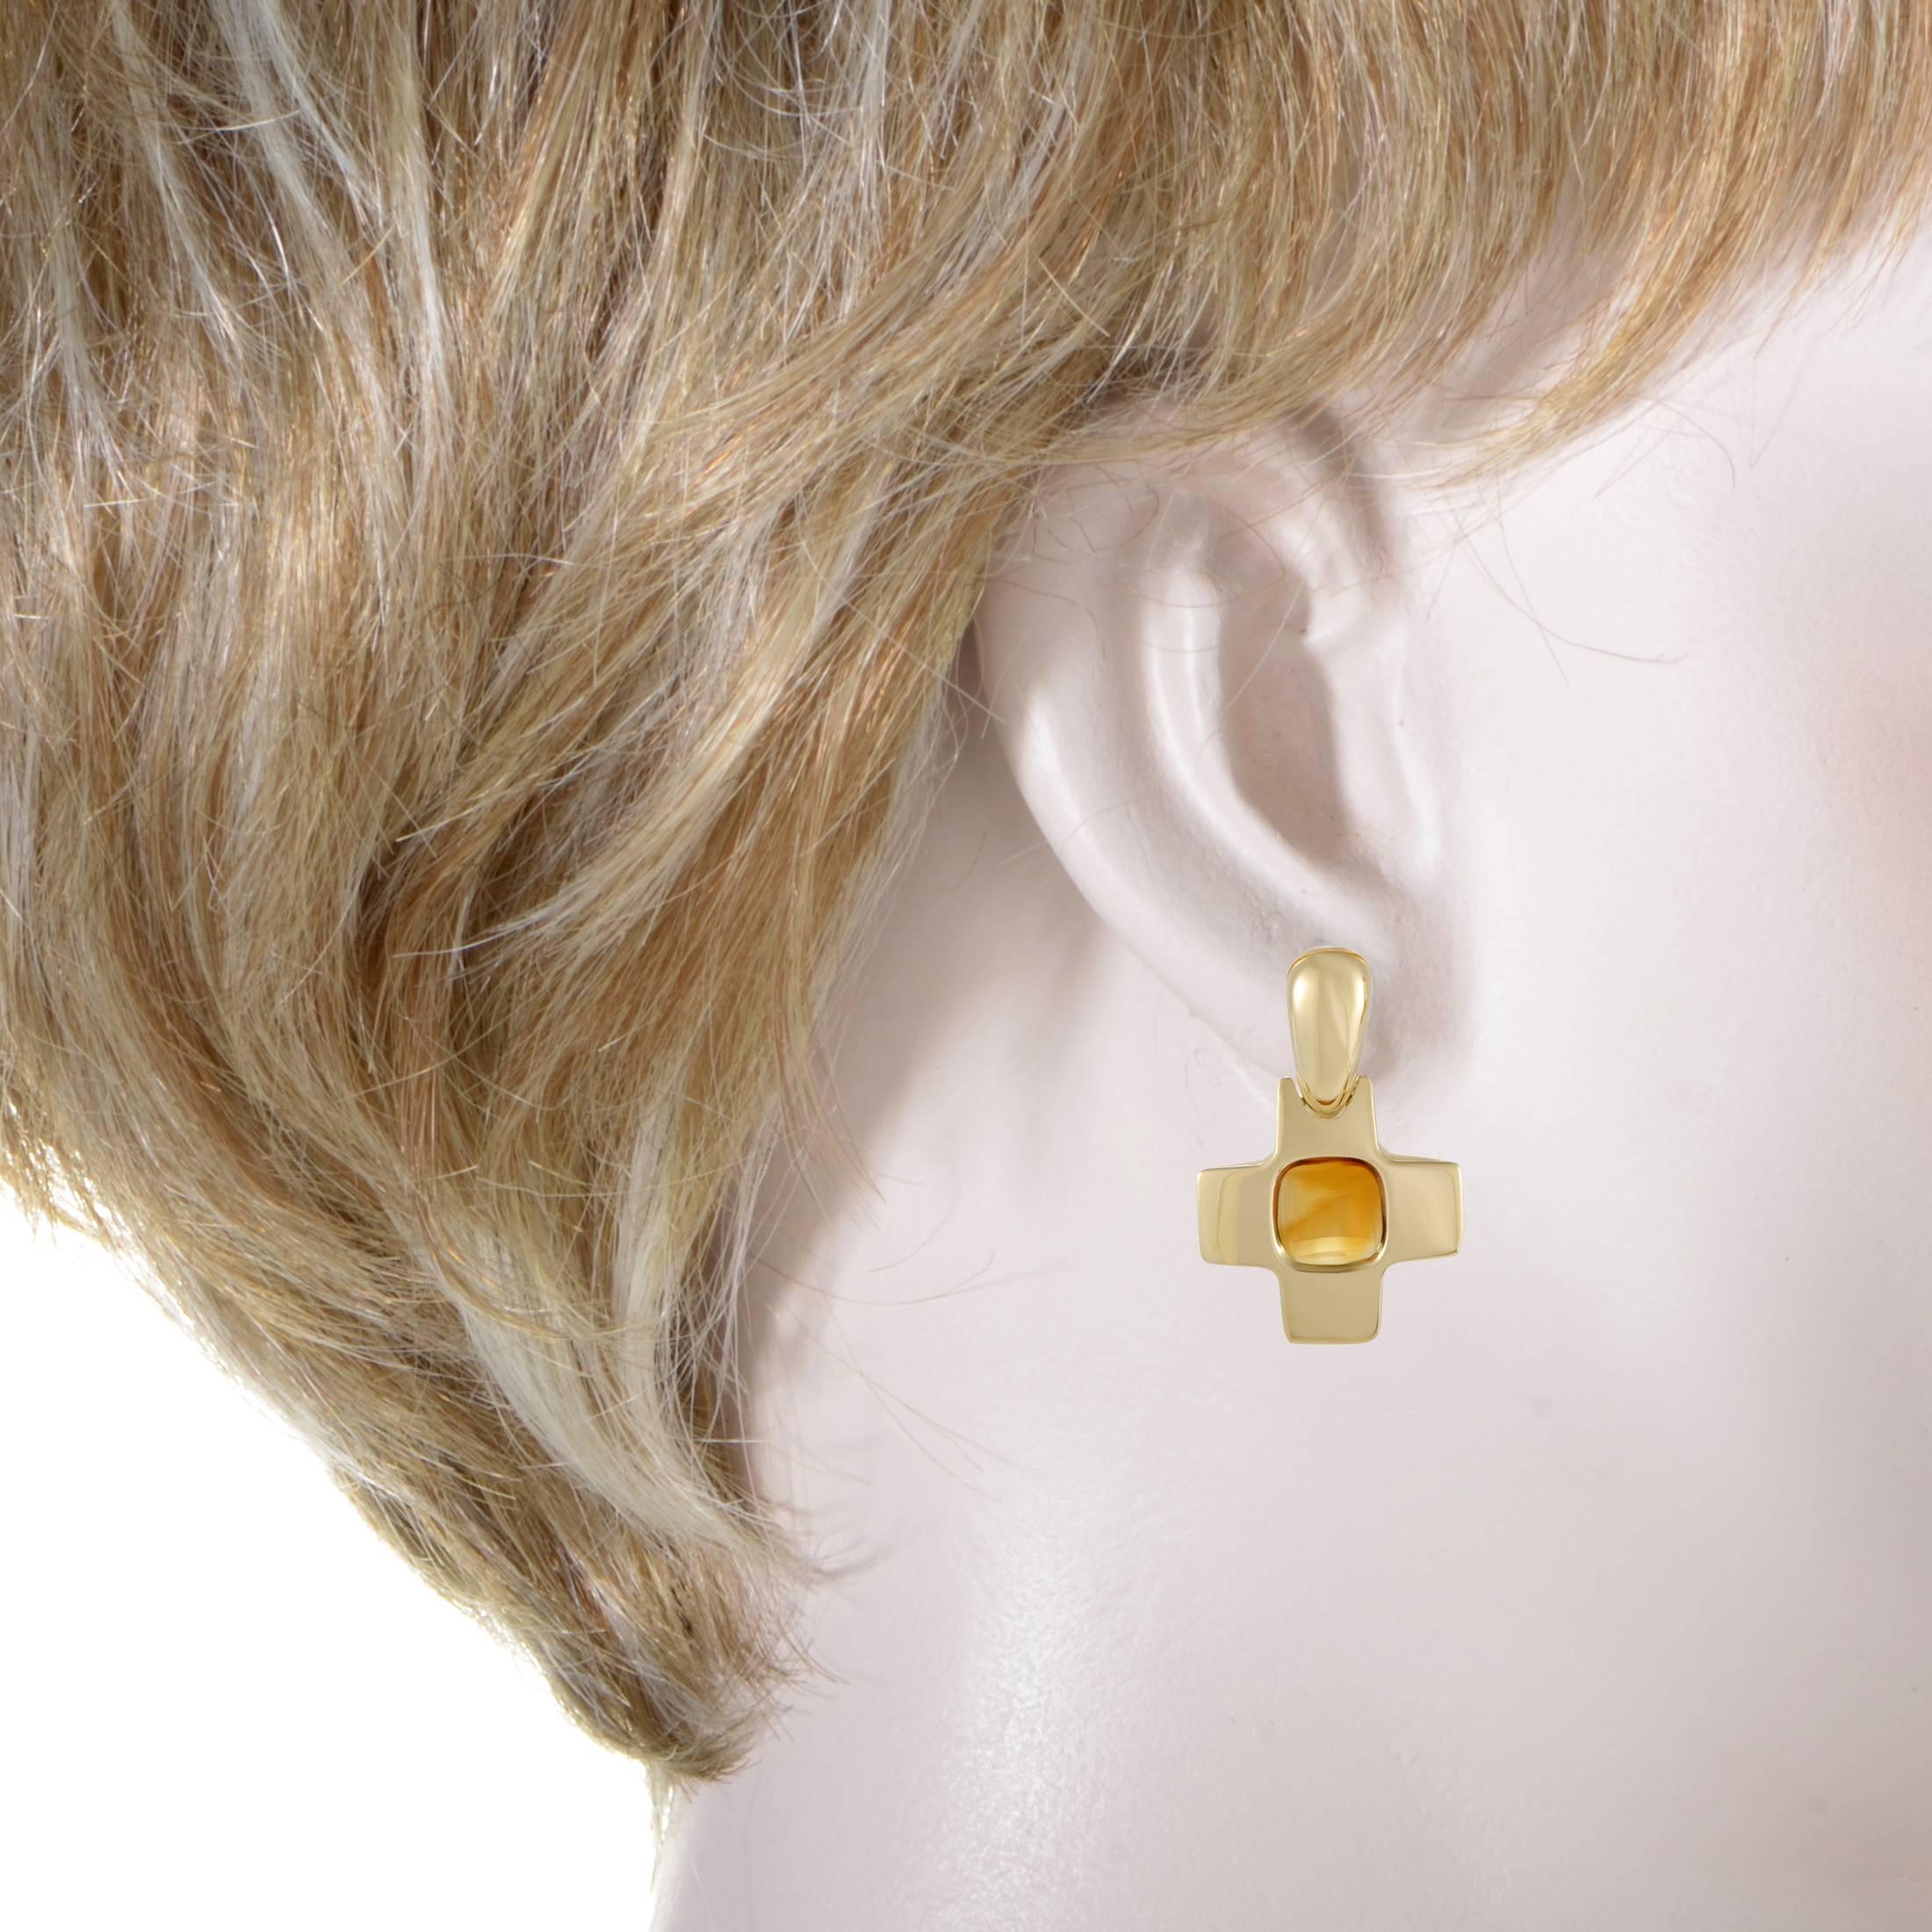 Perfectly falling into place with both their splendid shape and enchanting color, the stunning citrine stones aptly complete the sight of smoothness and warmth set by the luxurious 18K yellow gold in these marvelous earrings from Pomellato.
Included